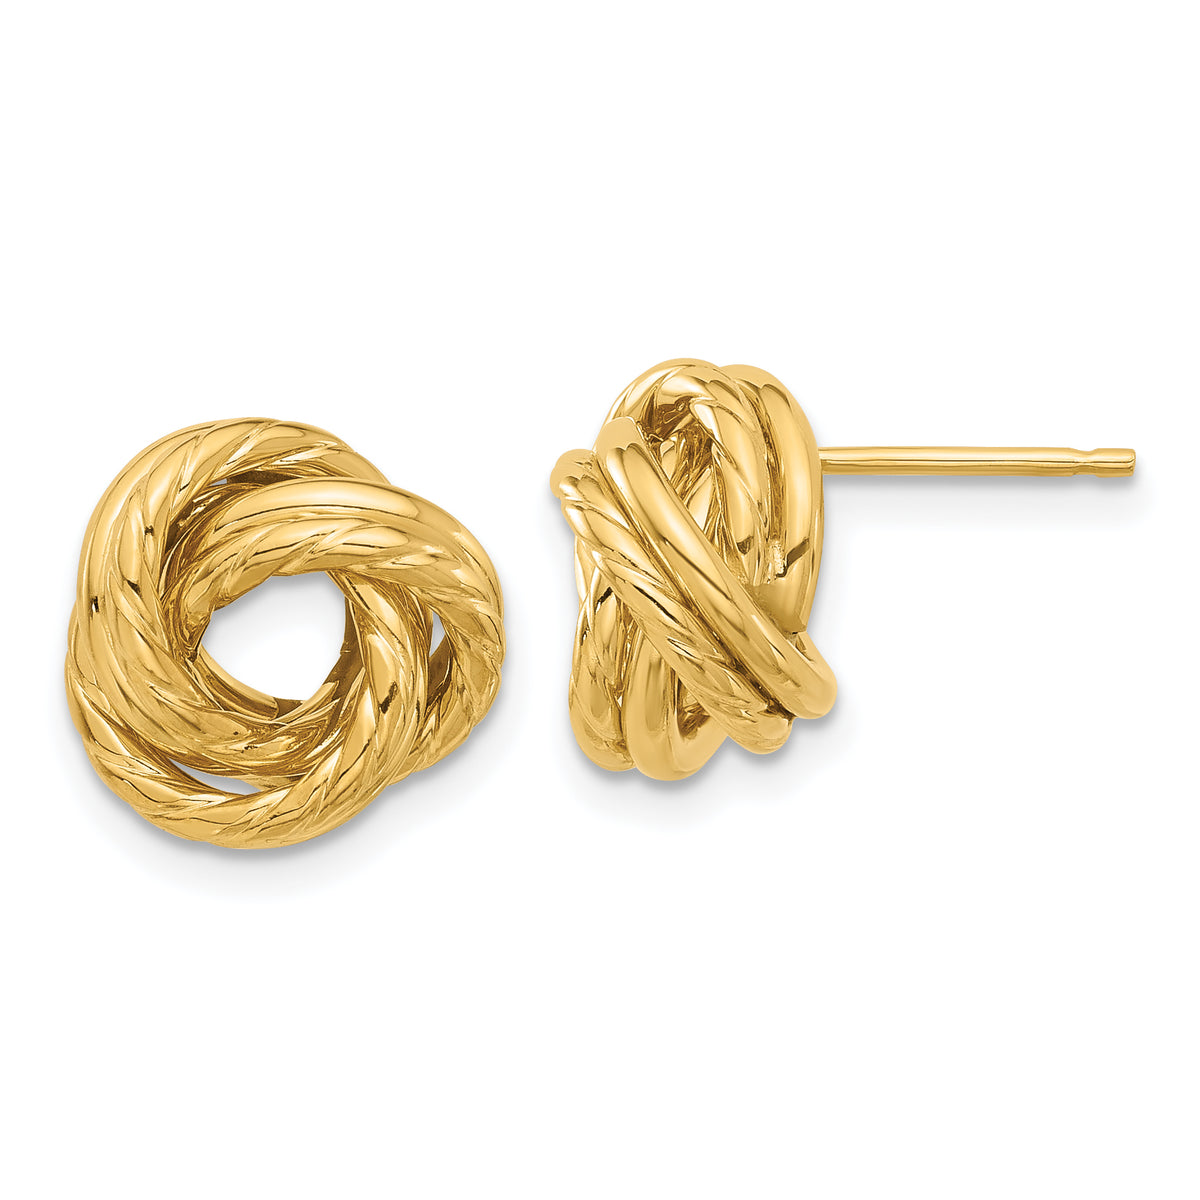 14K Polished and Textured Love Knot Post Earrings